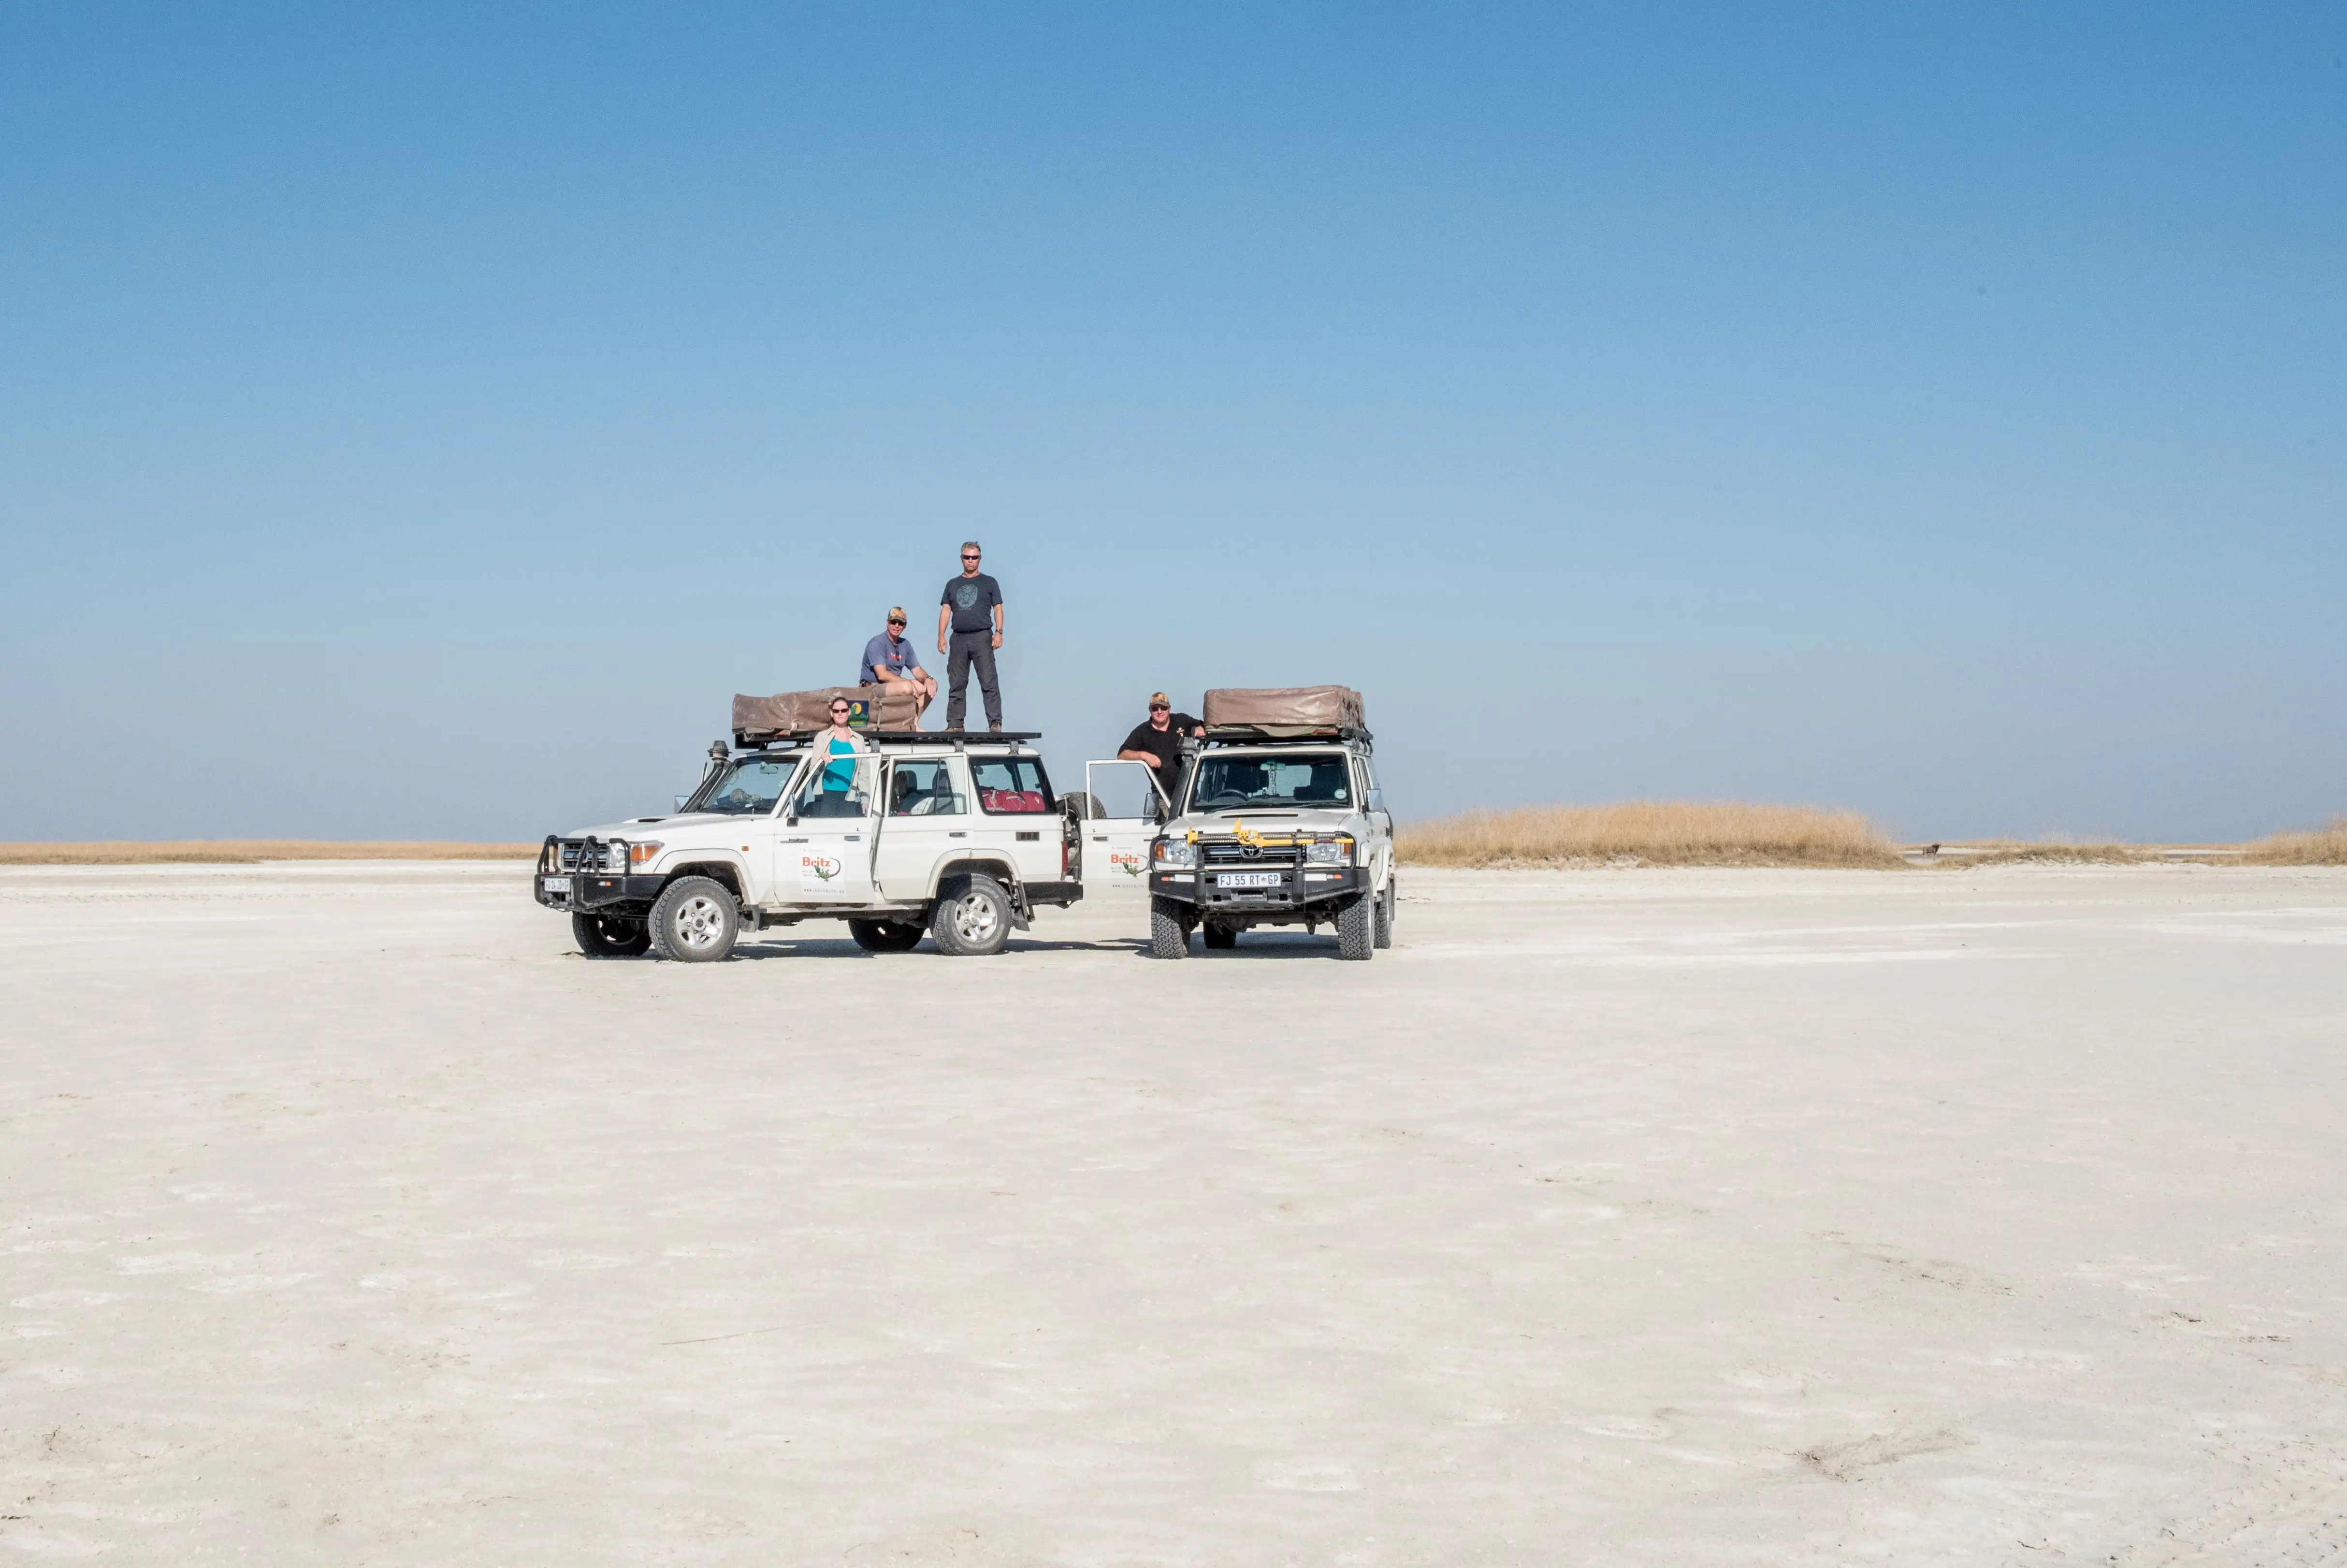 Two 4x4 campers in the desert in Botswana with people standing on the roof